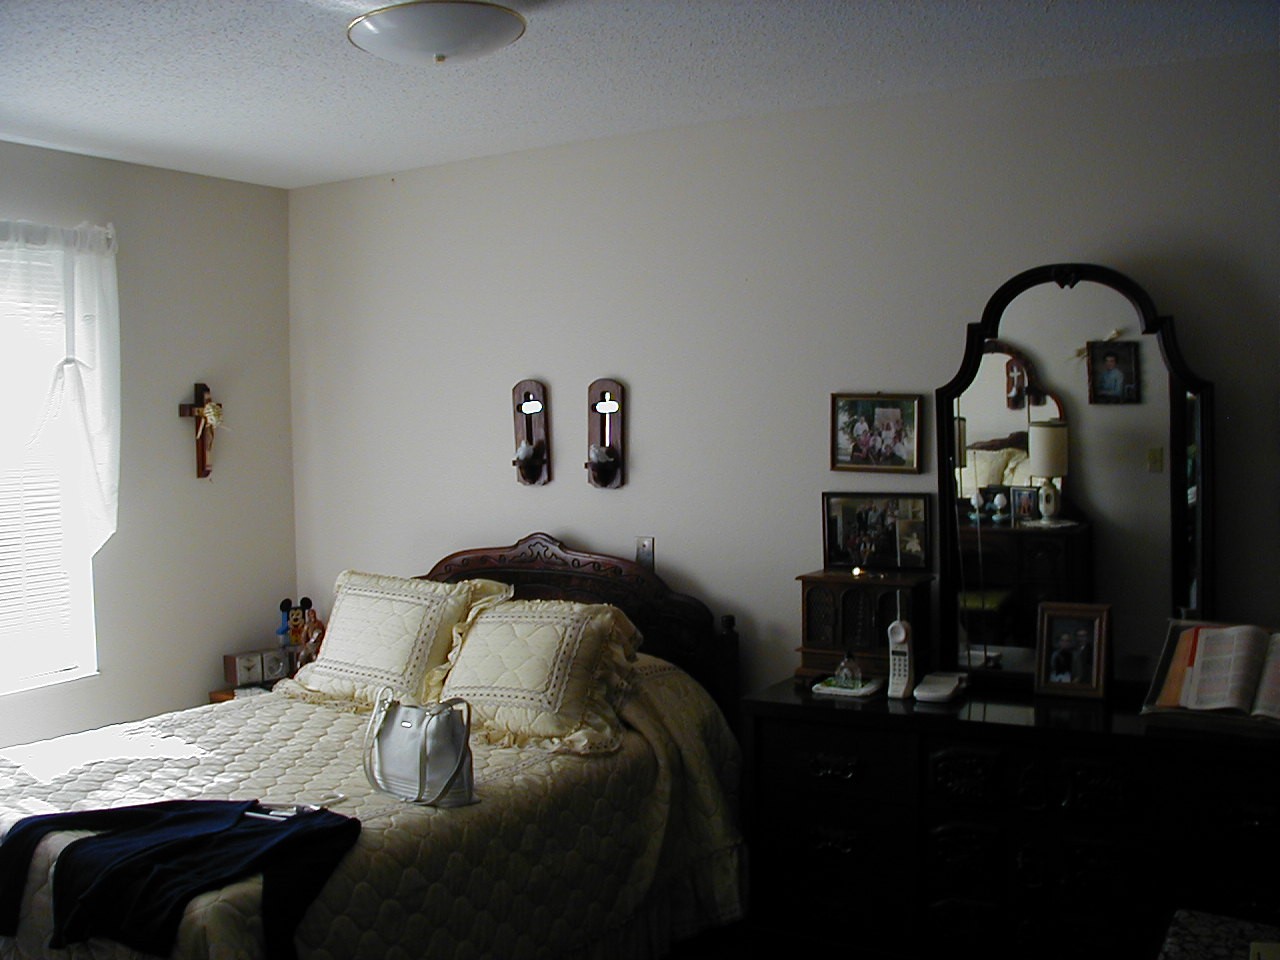 Bedroom of an apartment unit of Appletree Court